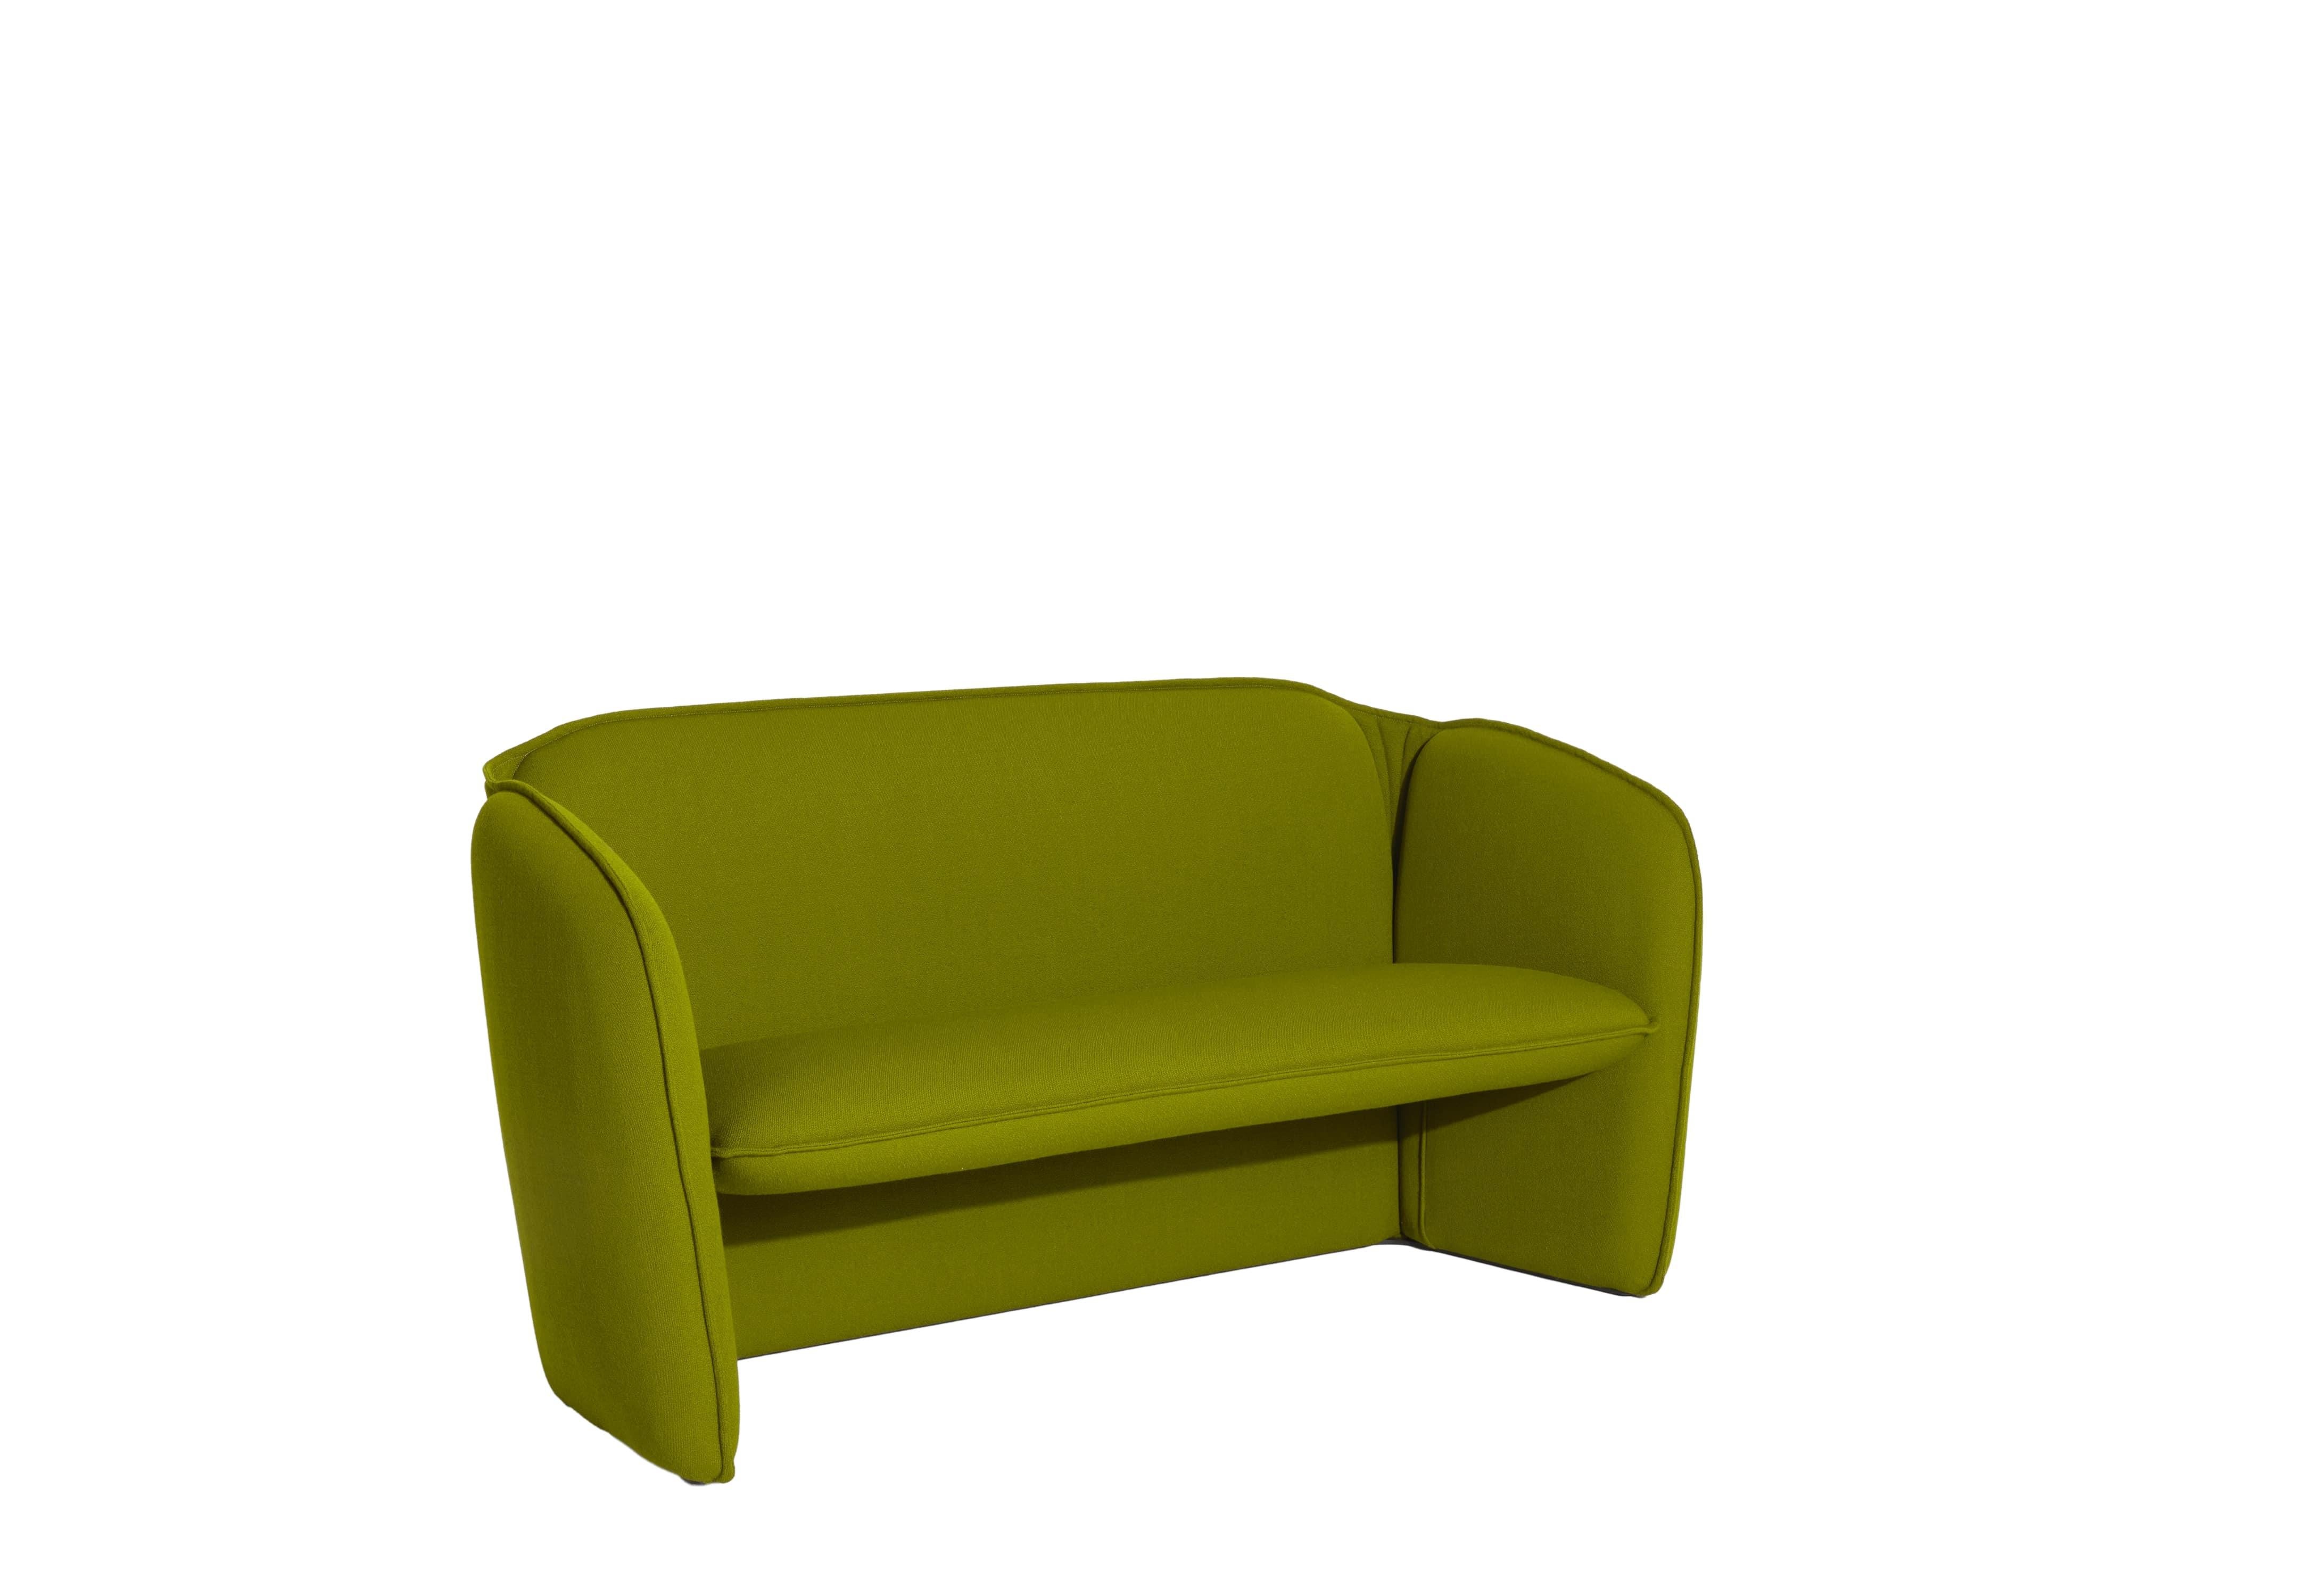 Petite Friture Lily Sofa in Olive Green by Färg & Blanche, 2022

A comprehensive collection comprising a sofa and armchair. With impeccable, concise proportions, and smooth and organic contours for a hospitable feel.

Established in Stockholm in